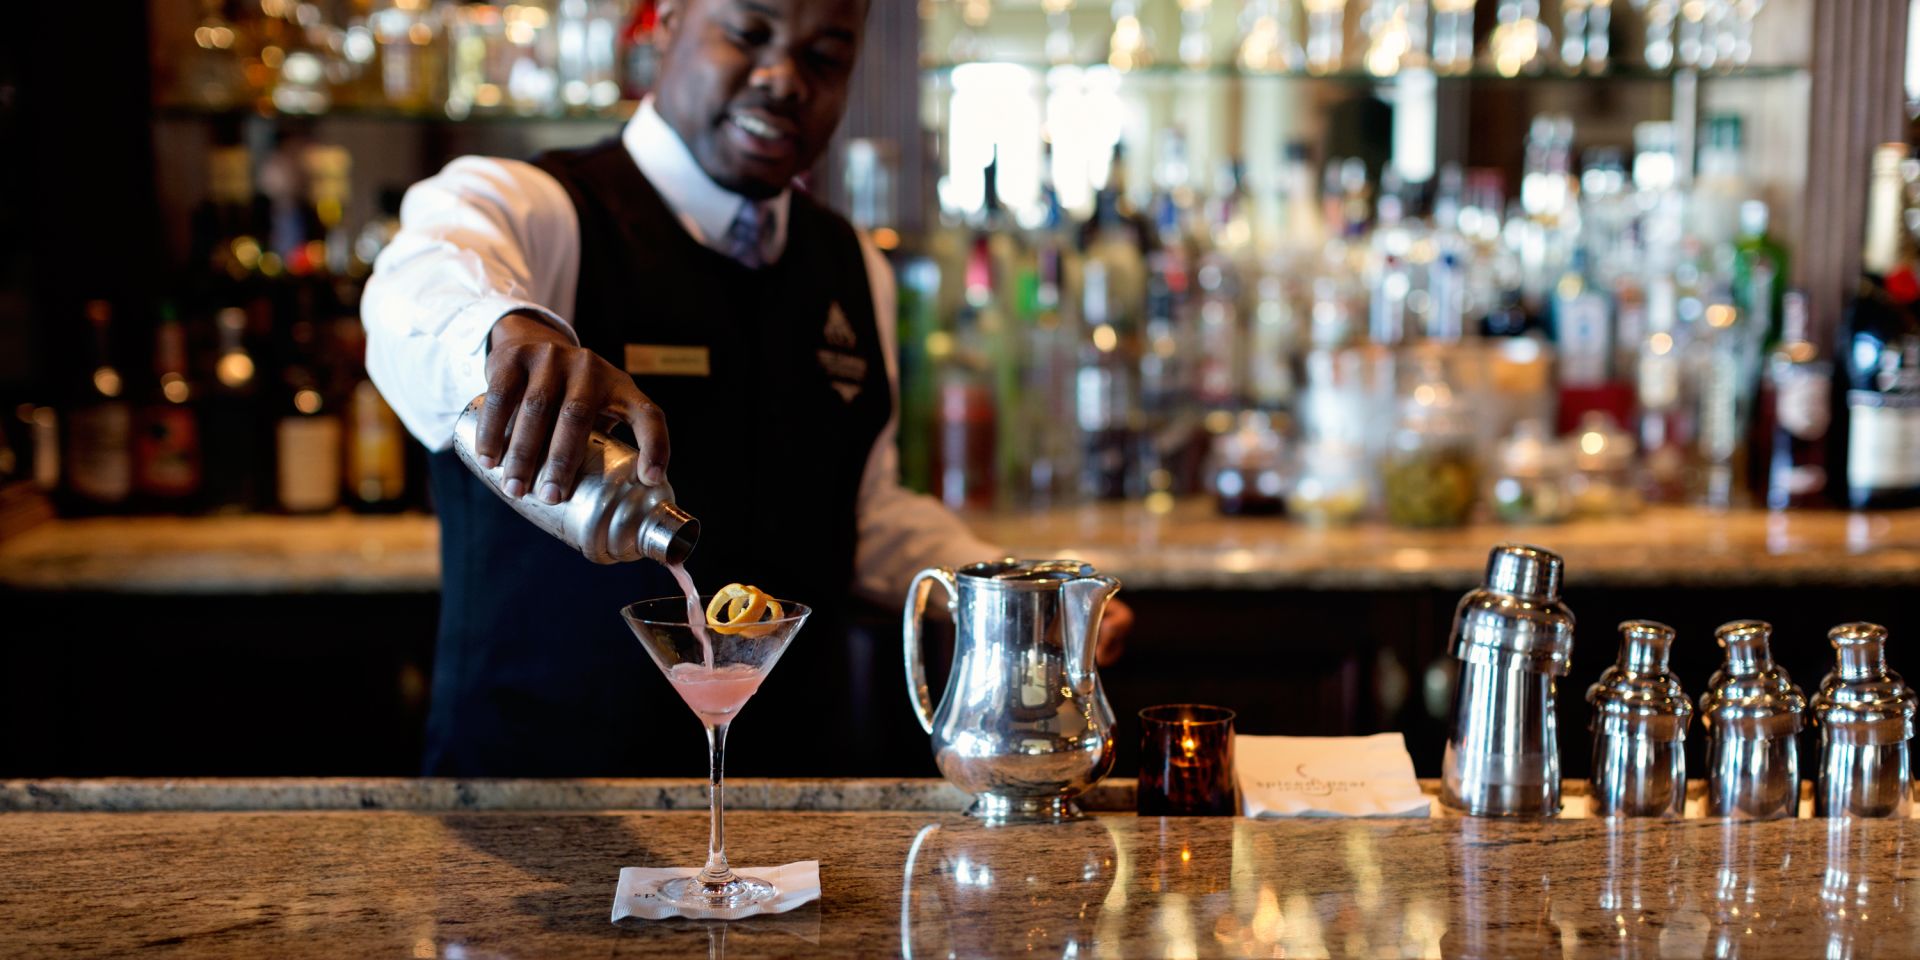 Maurice pouring a cocktail at The Chanler Bar